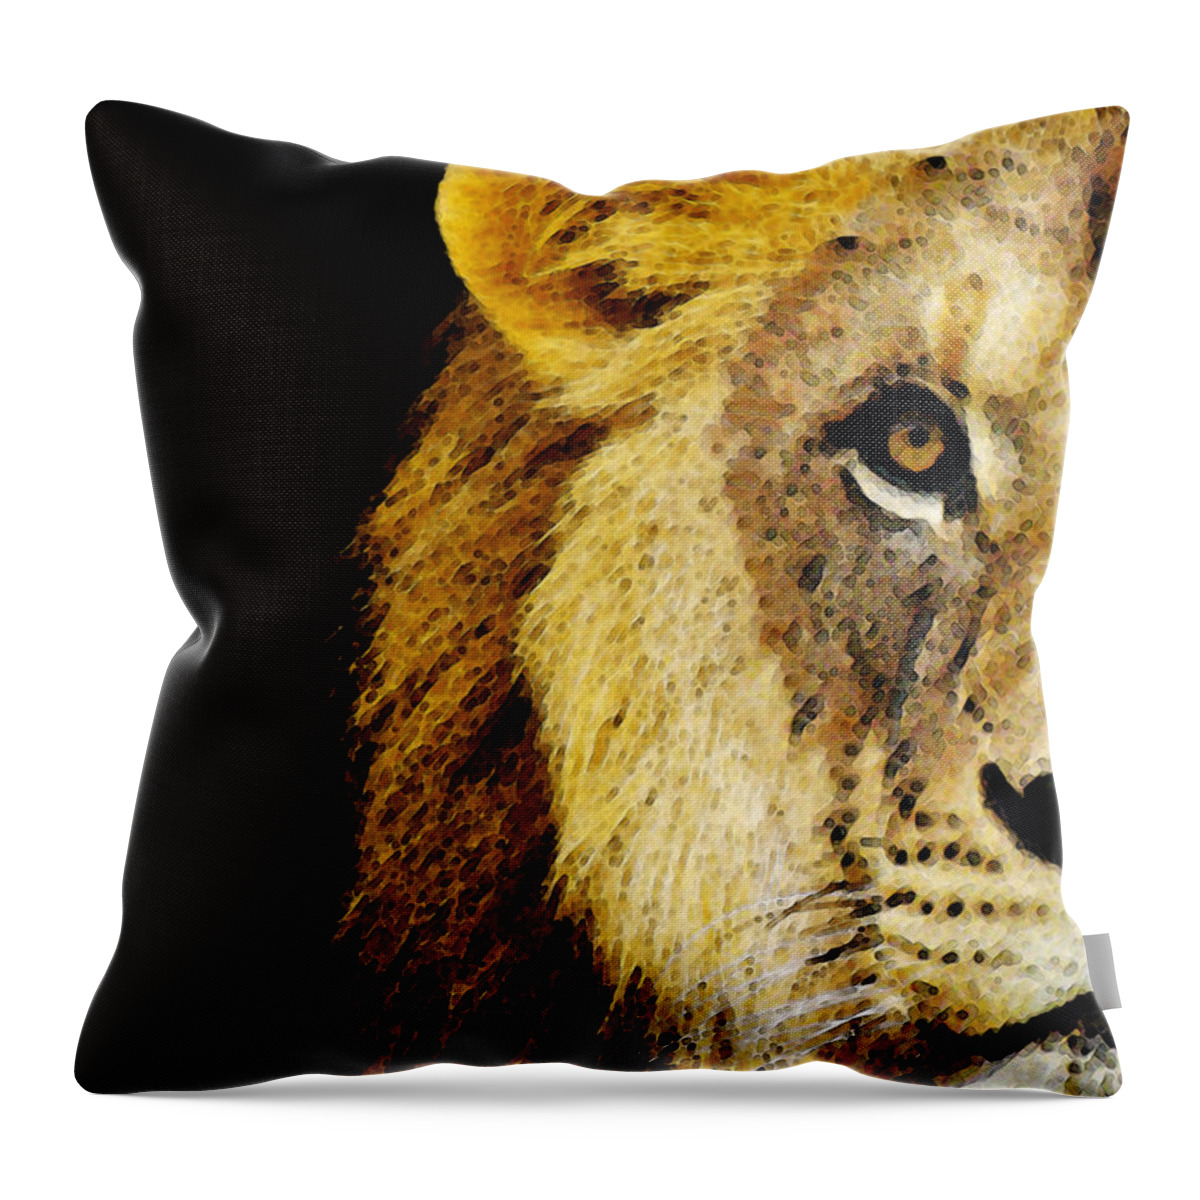 Lions Throw Pillow featuring the painting Lion Art - Face Off by Sharon Cummings